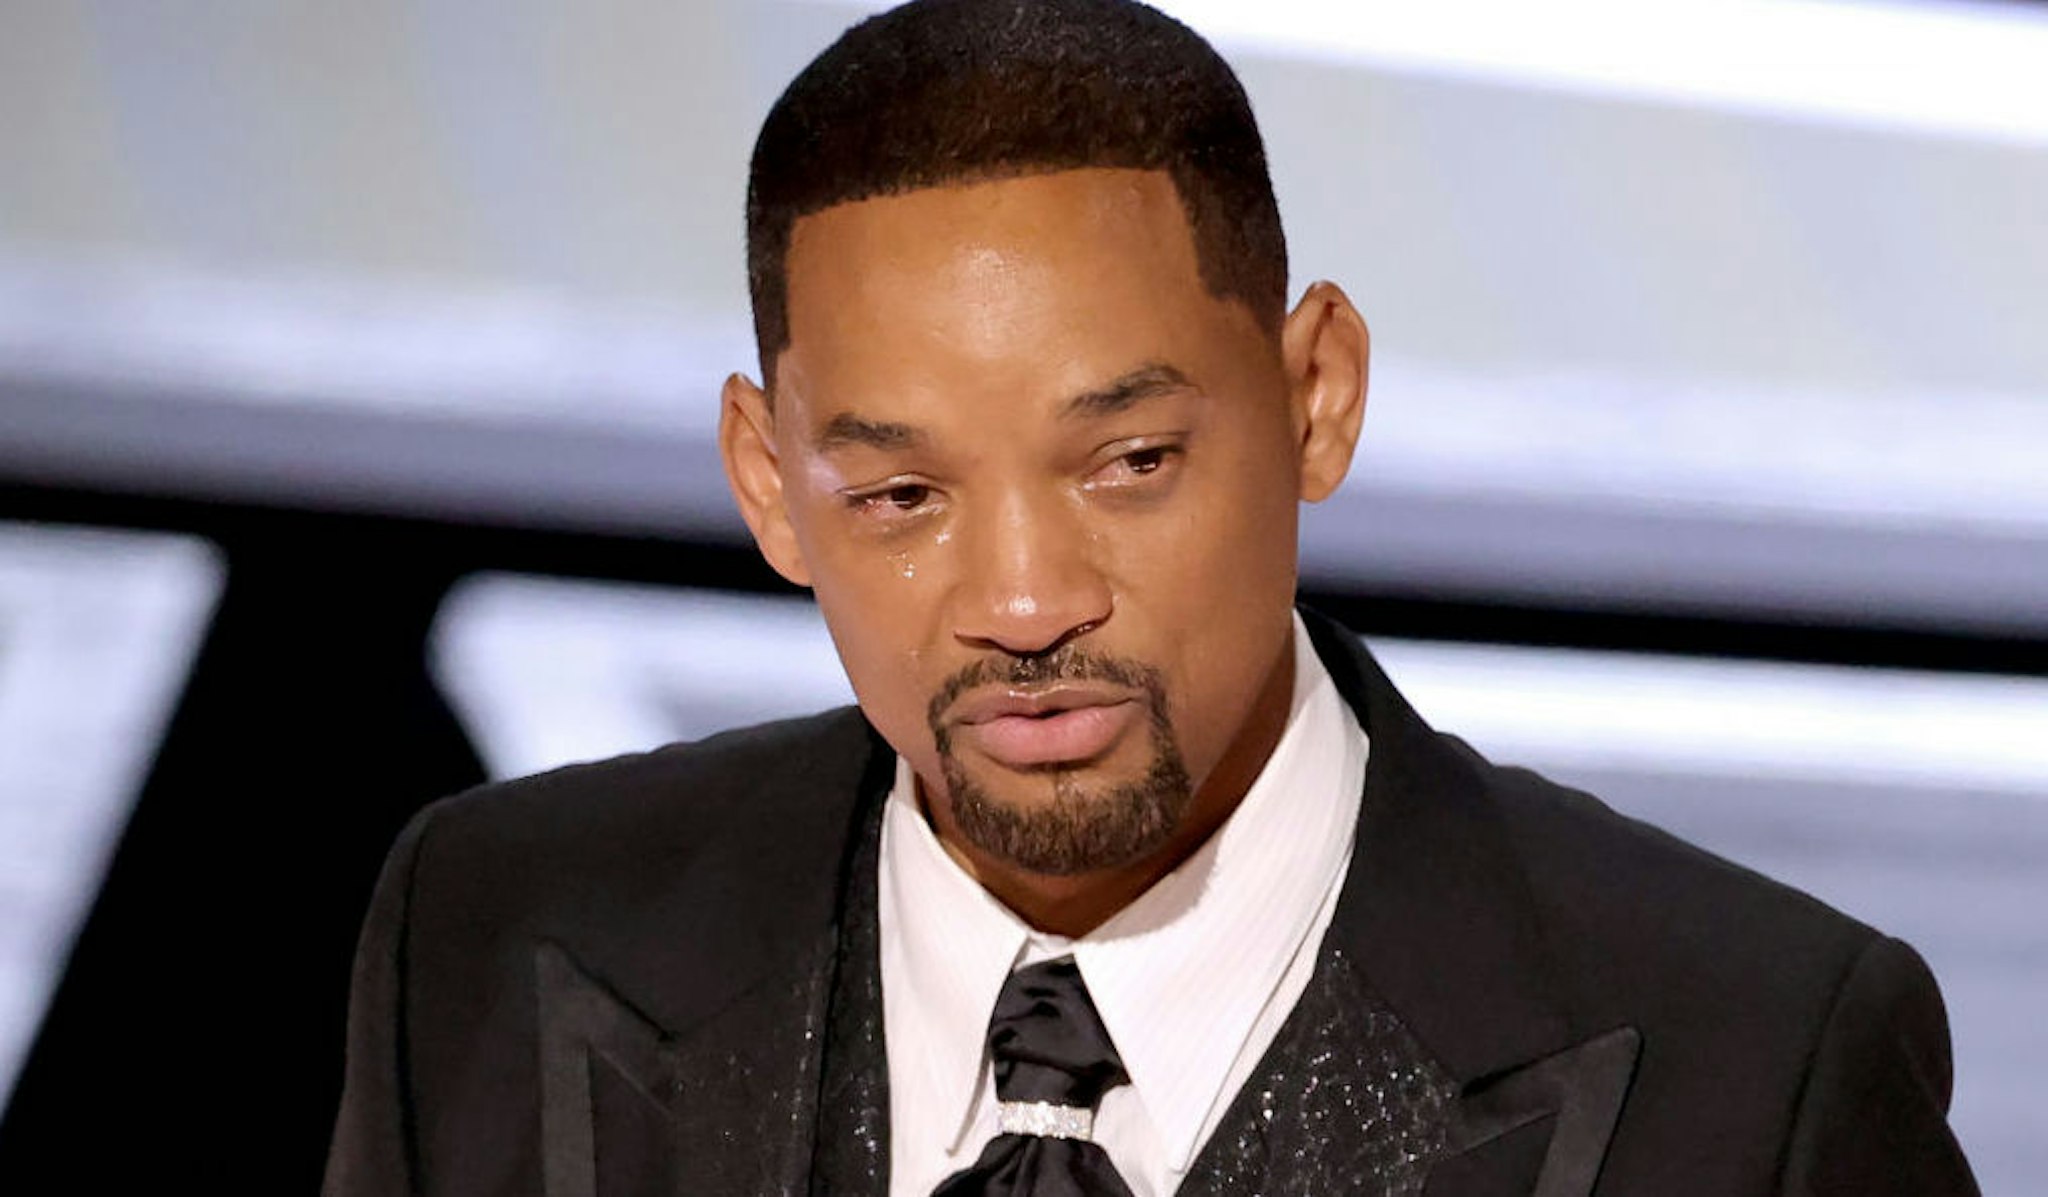 Will Smith accepts the Actor in a Leading Role award for ‘King Richard’ onstage during the 94th Annual Academy Awards at Dolby Theatre on March 27, 2022 in Hollywood, California.